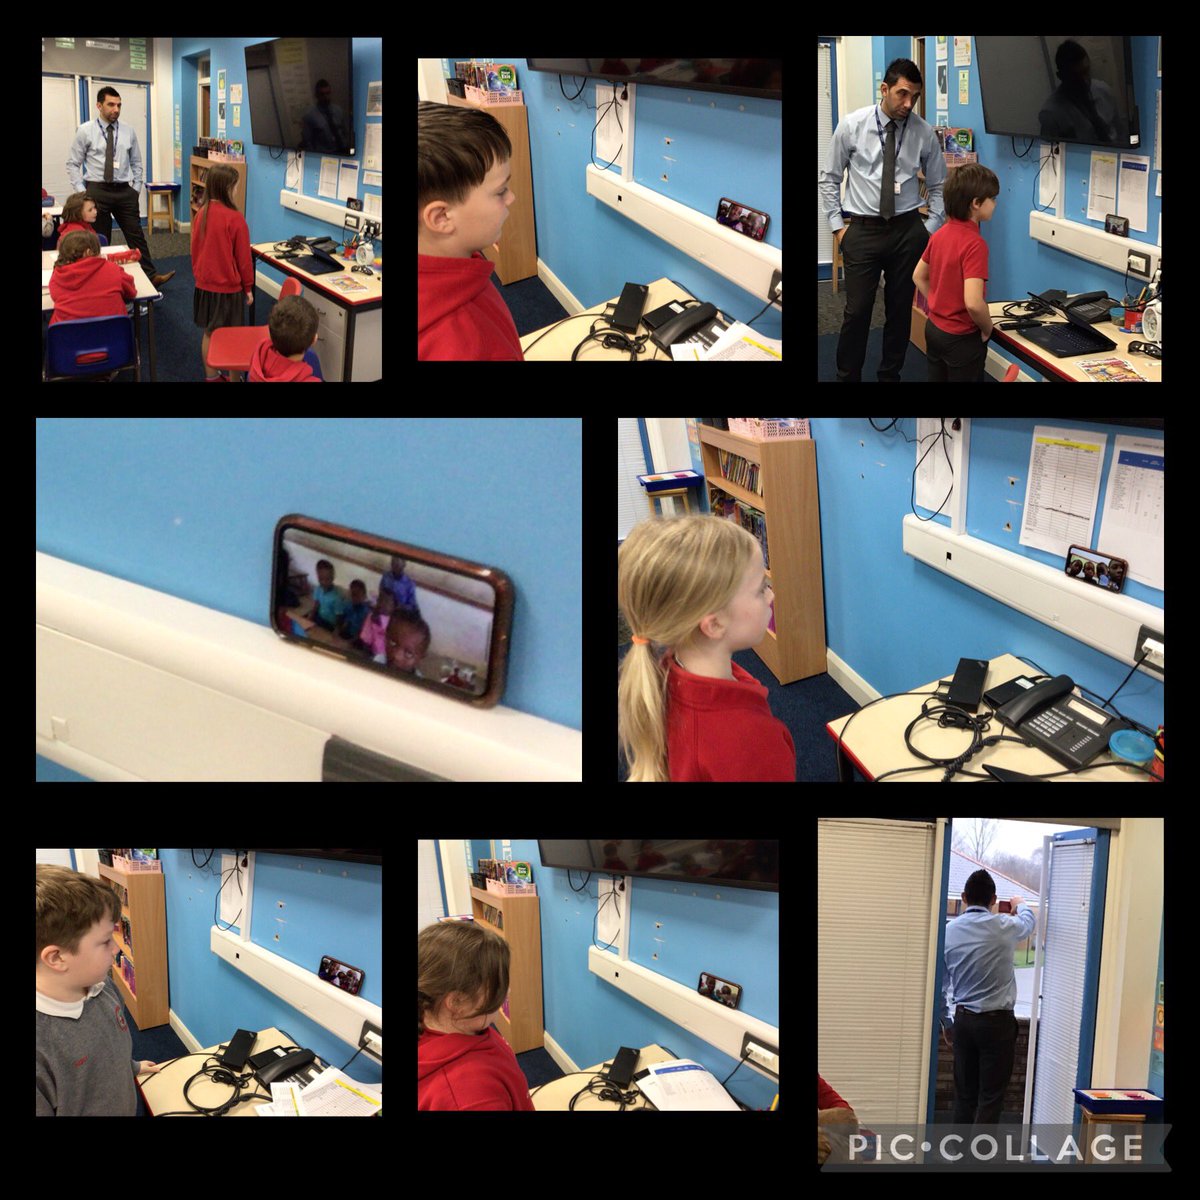 #DosbarthMarlas had an amazing opportunity to link up with a school in Kenya via video link today. It was a wonderful experience to share information and experiences with children in Africa. #YGTLLC #YGTHUM #YGTEIC